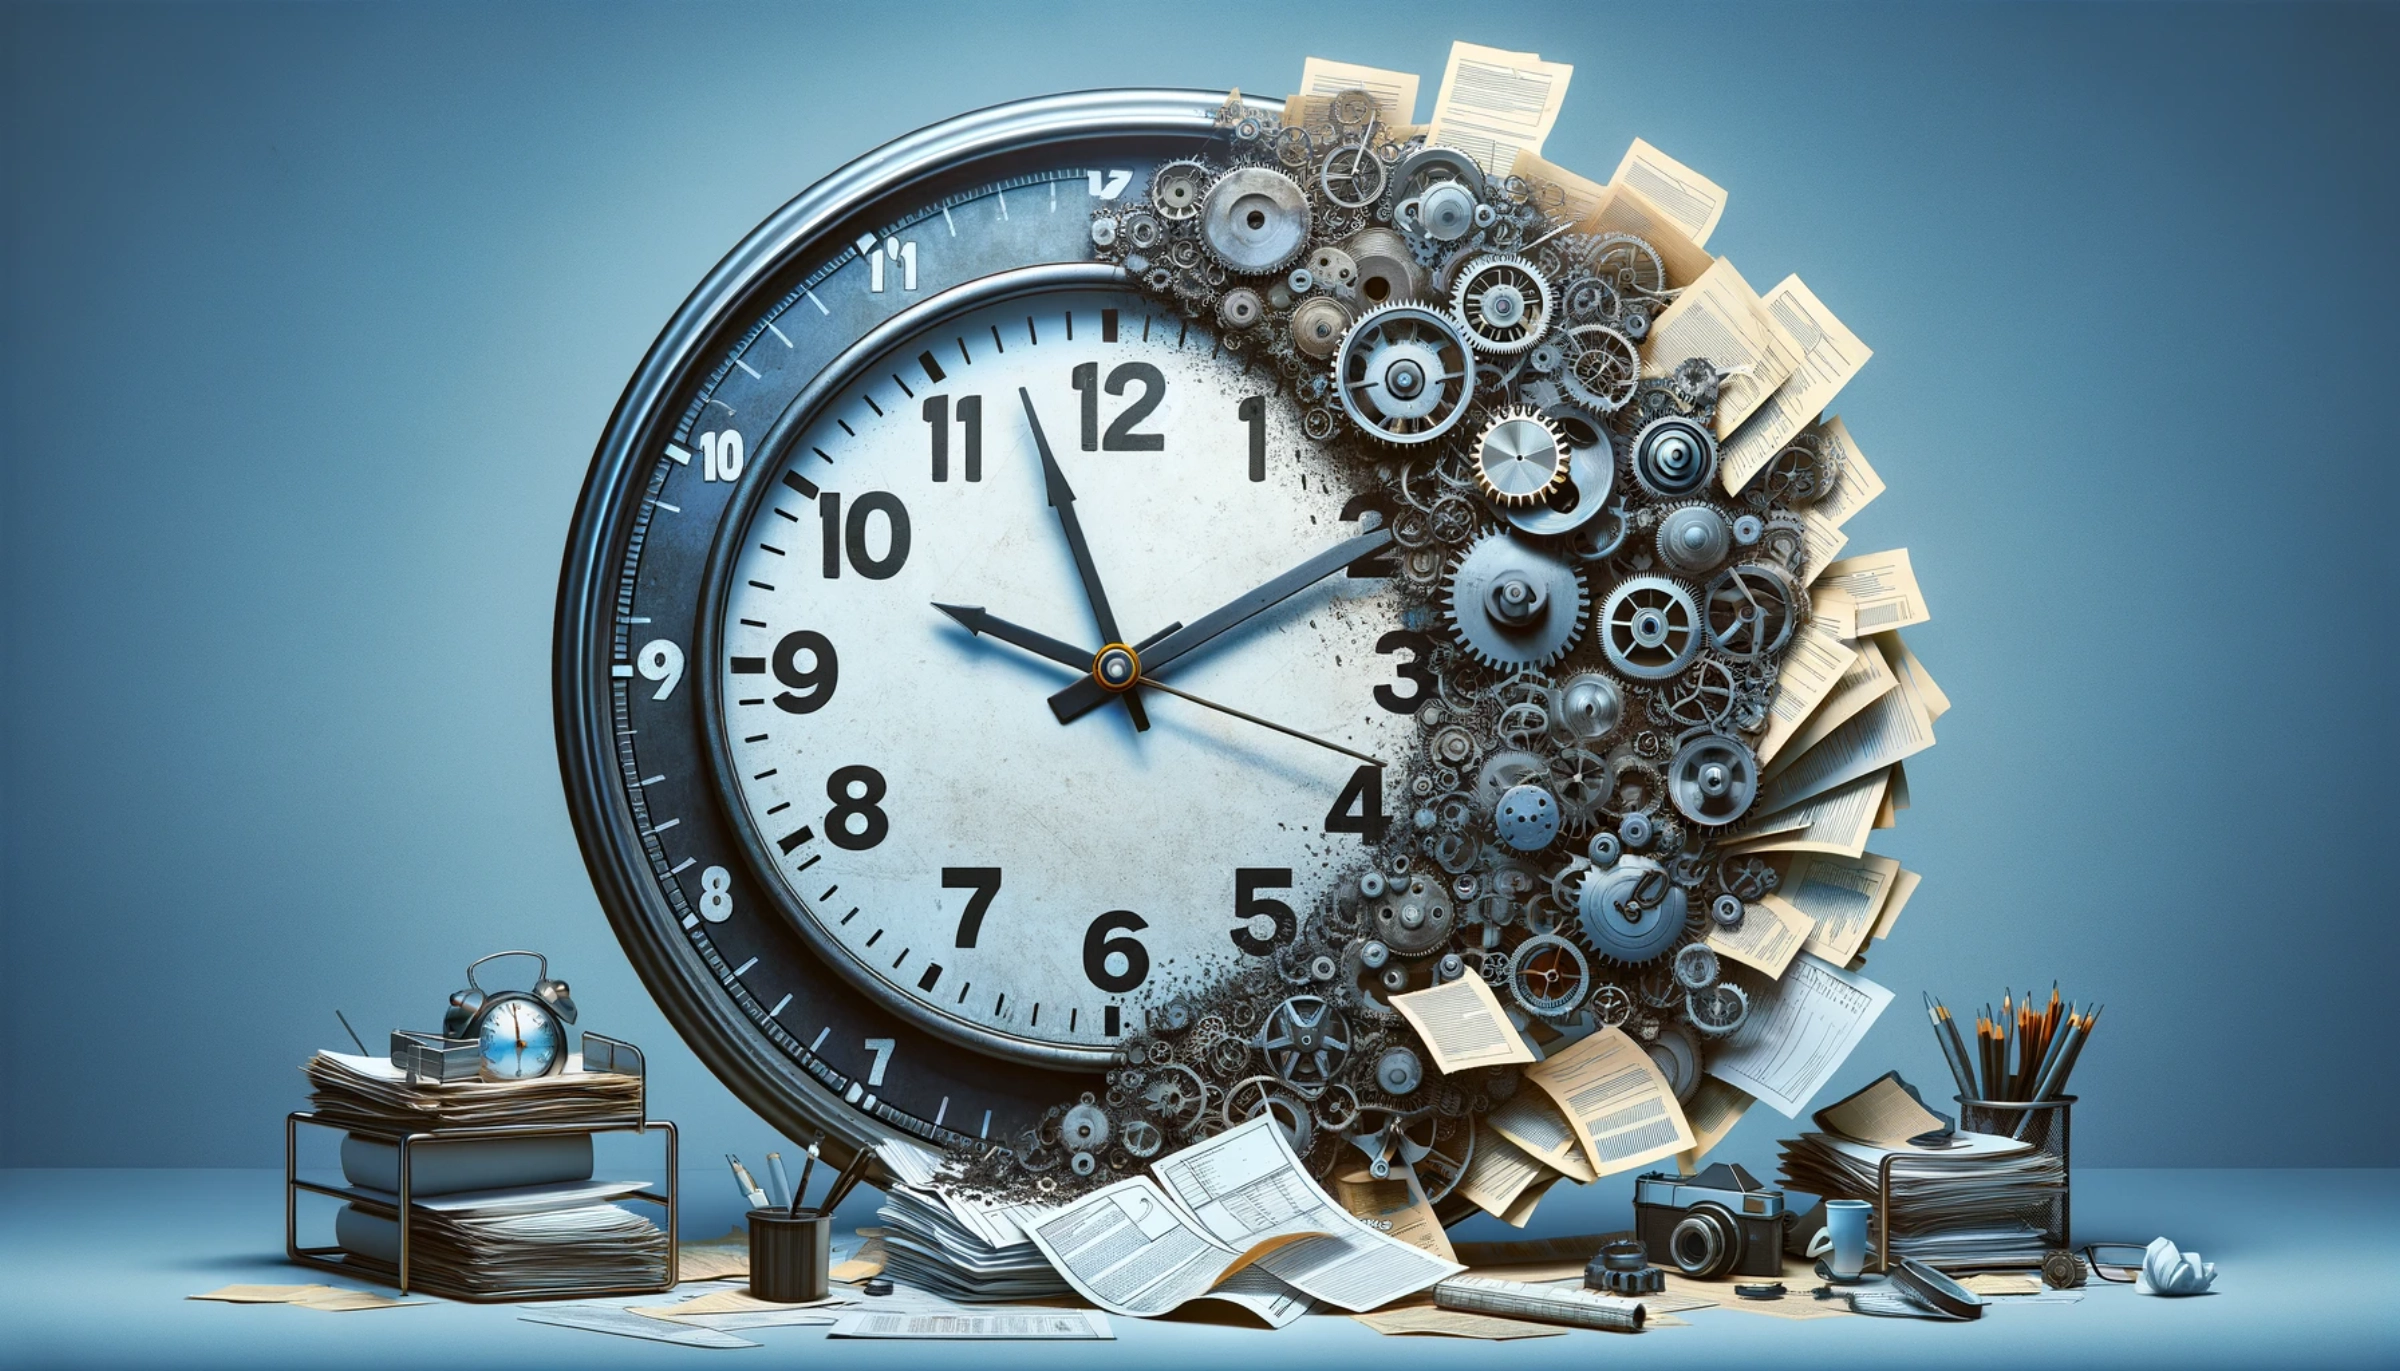 Repetitive tasks are shown consuming a large portion of a clock, symbolizing lost time.webp